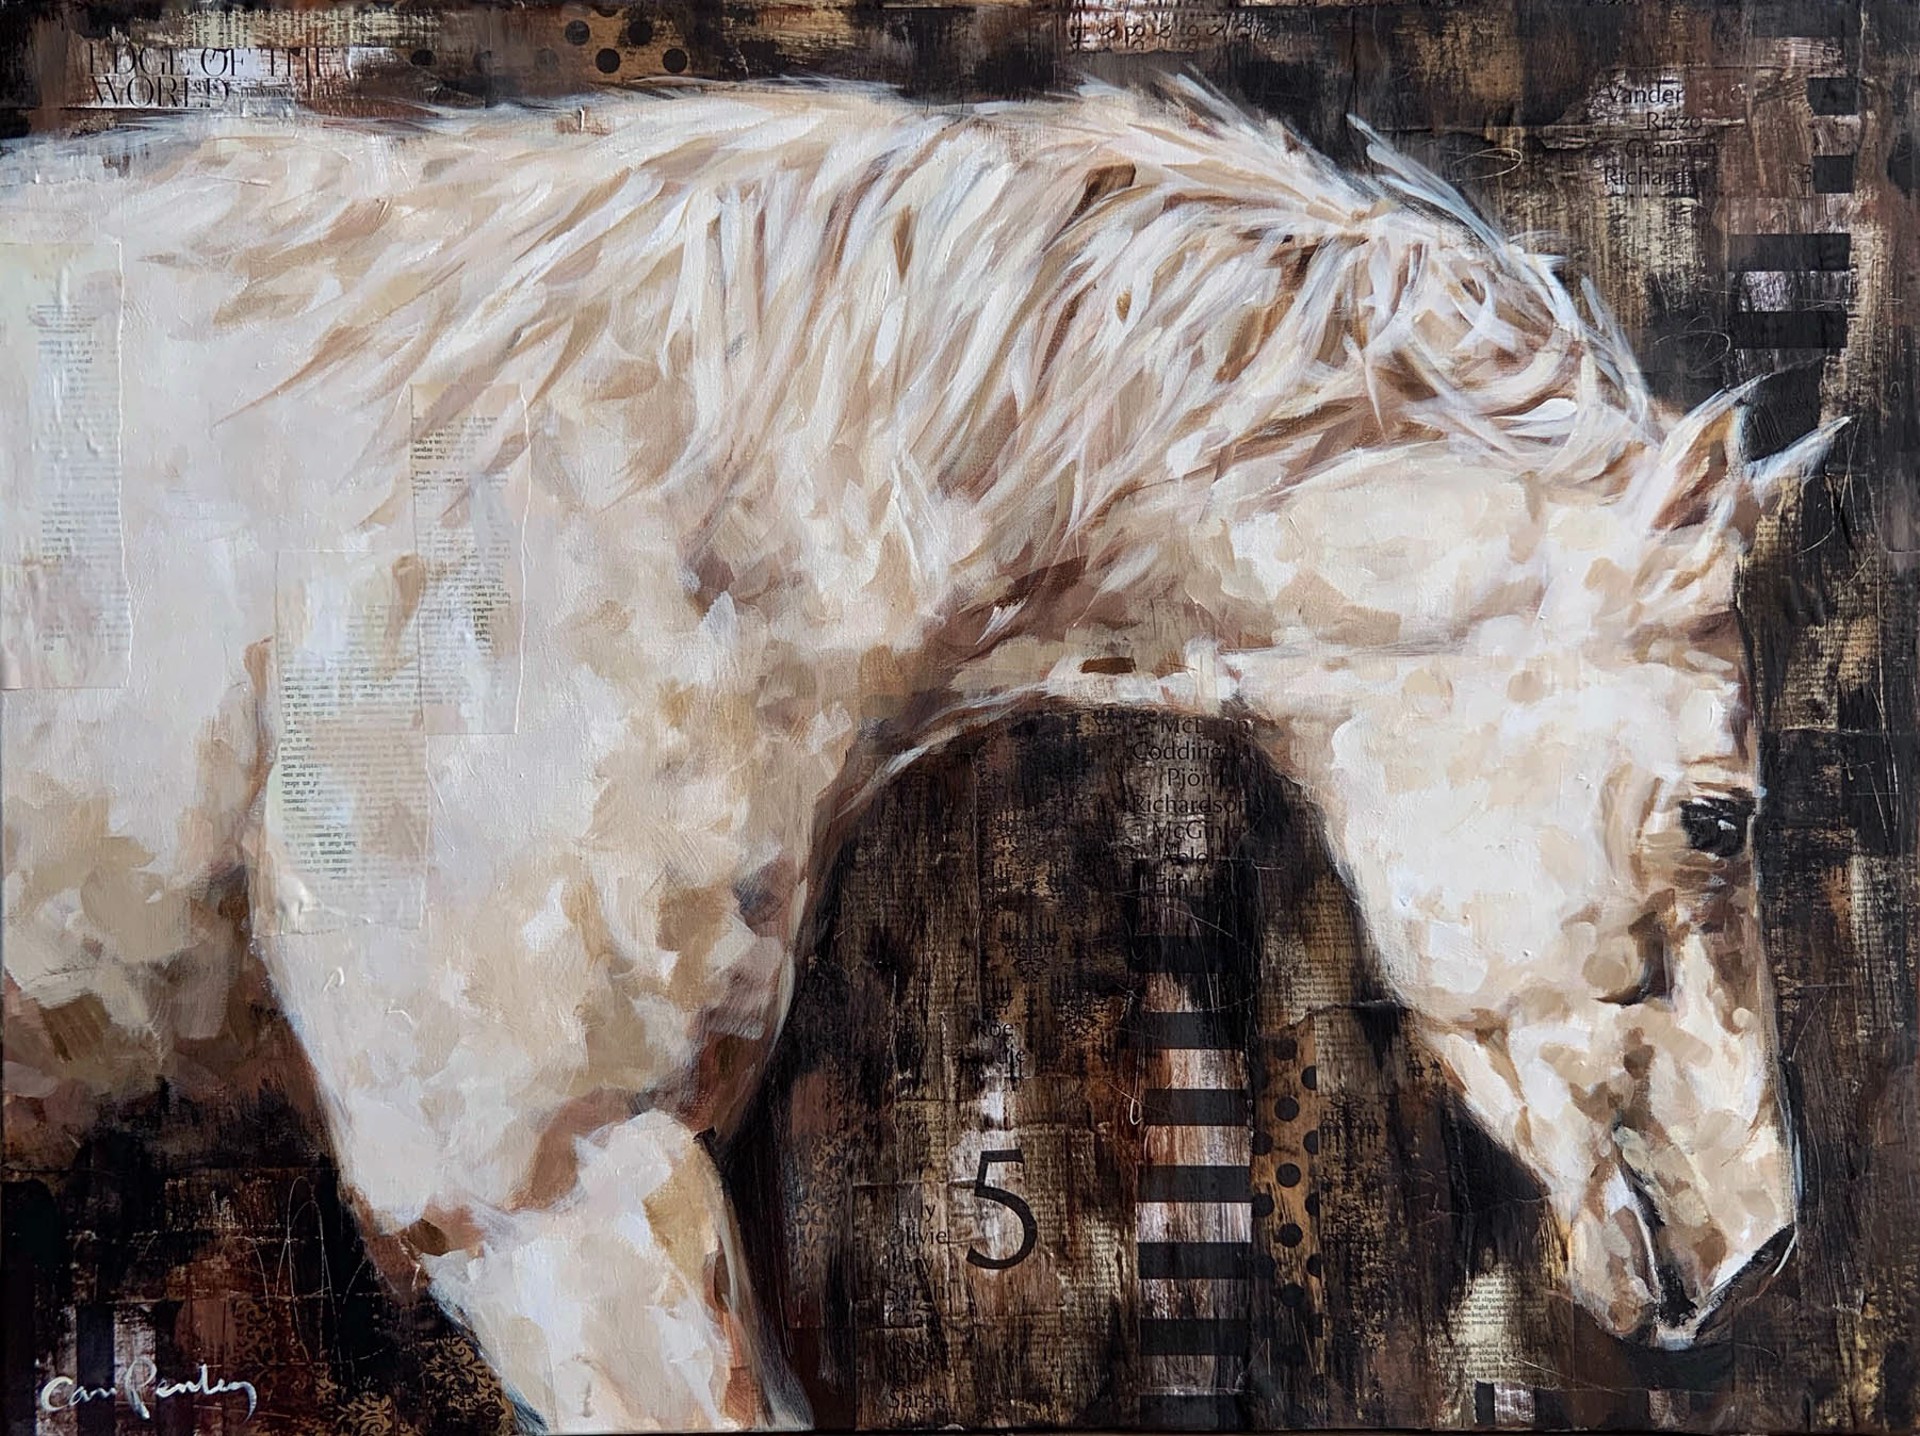 Painting Of The Front Of A White Horse On A Newspaper Collage Background Painted Brown, By Carrie Penley